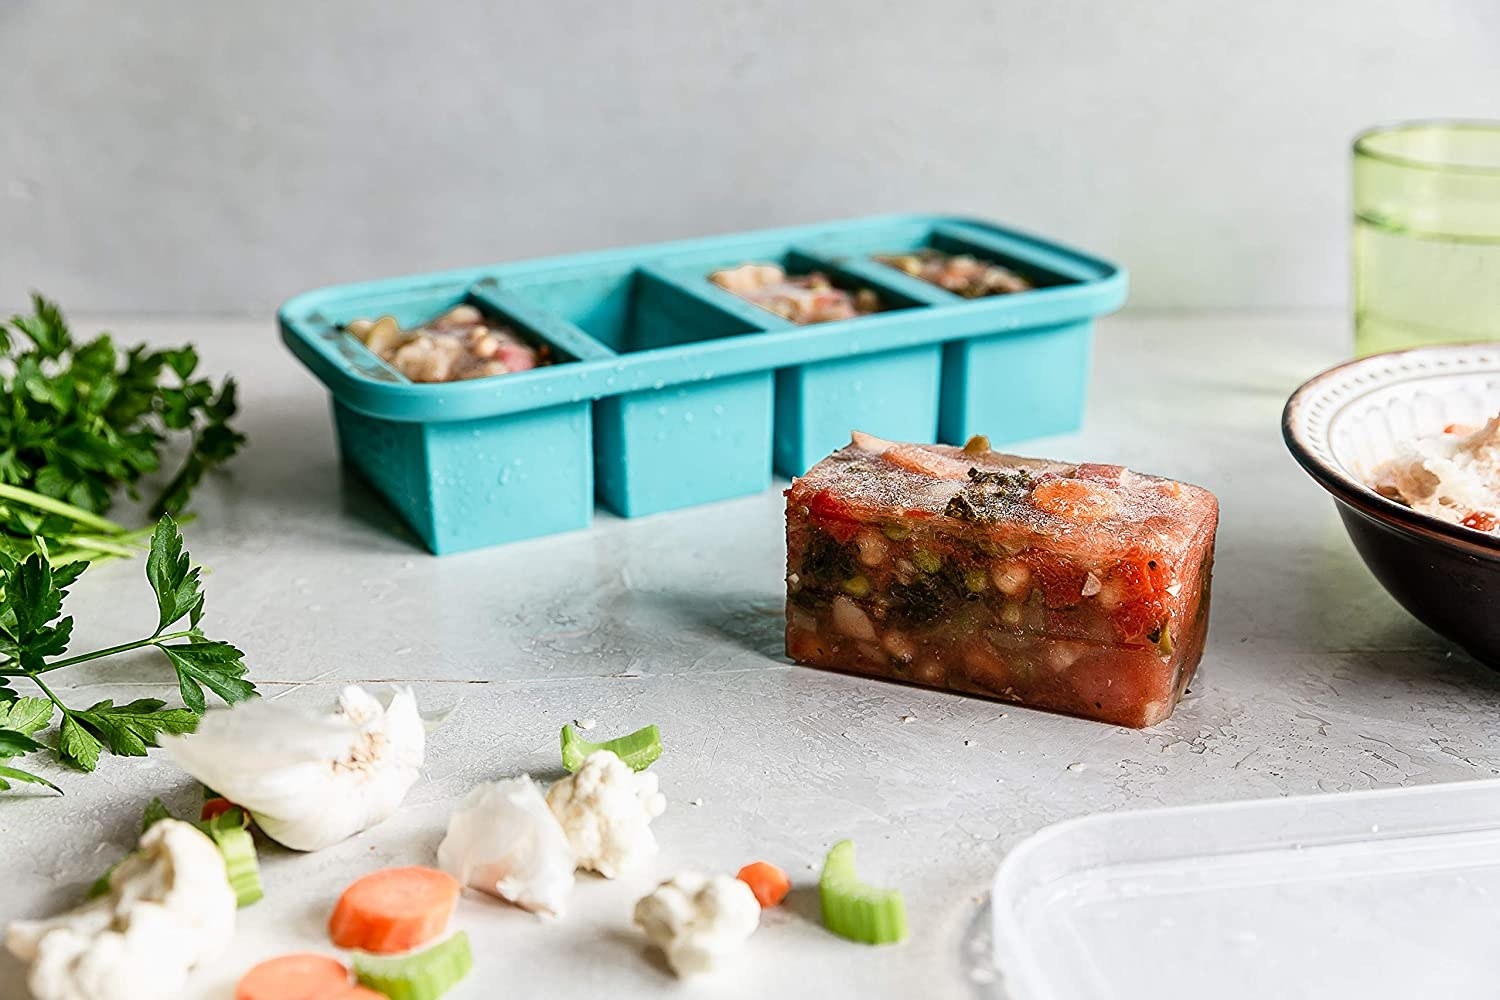 The five-compartment teal container that looks like a large ice cube tray, with a perfectly rectangular block of frozen soup next to it 